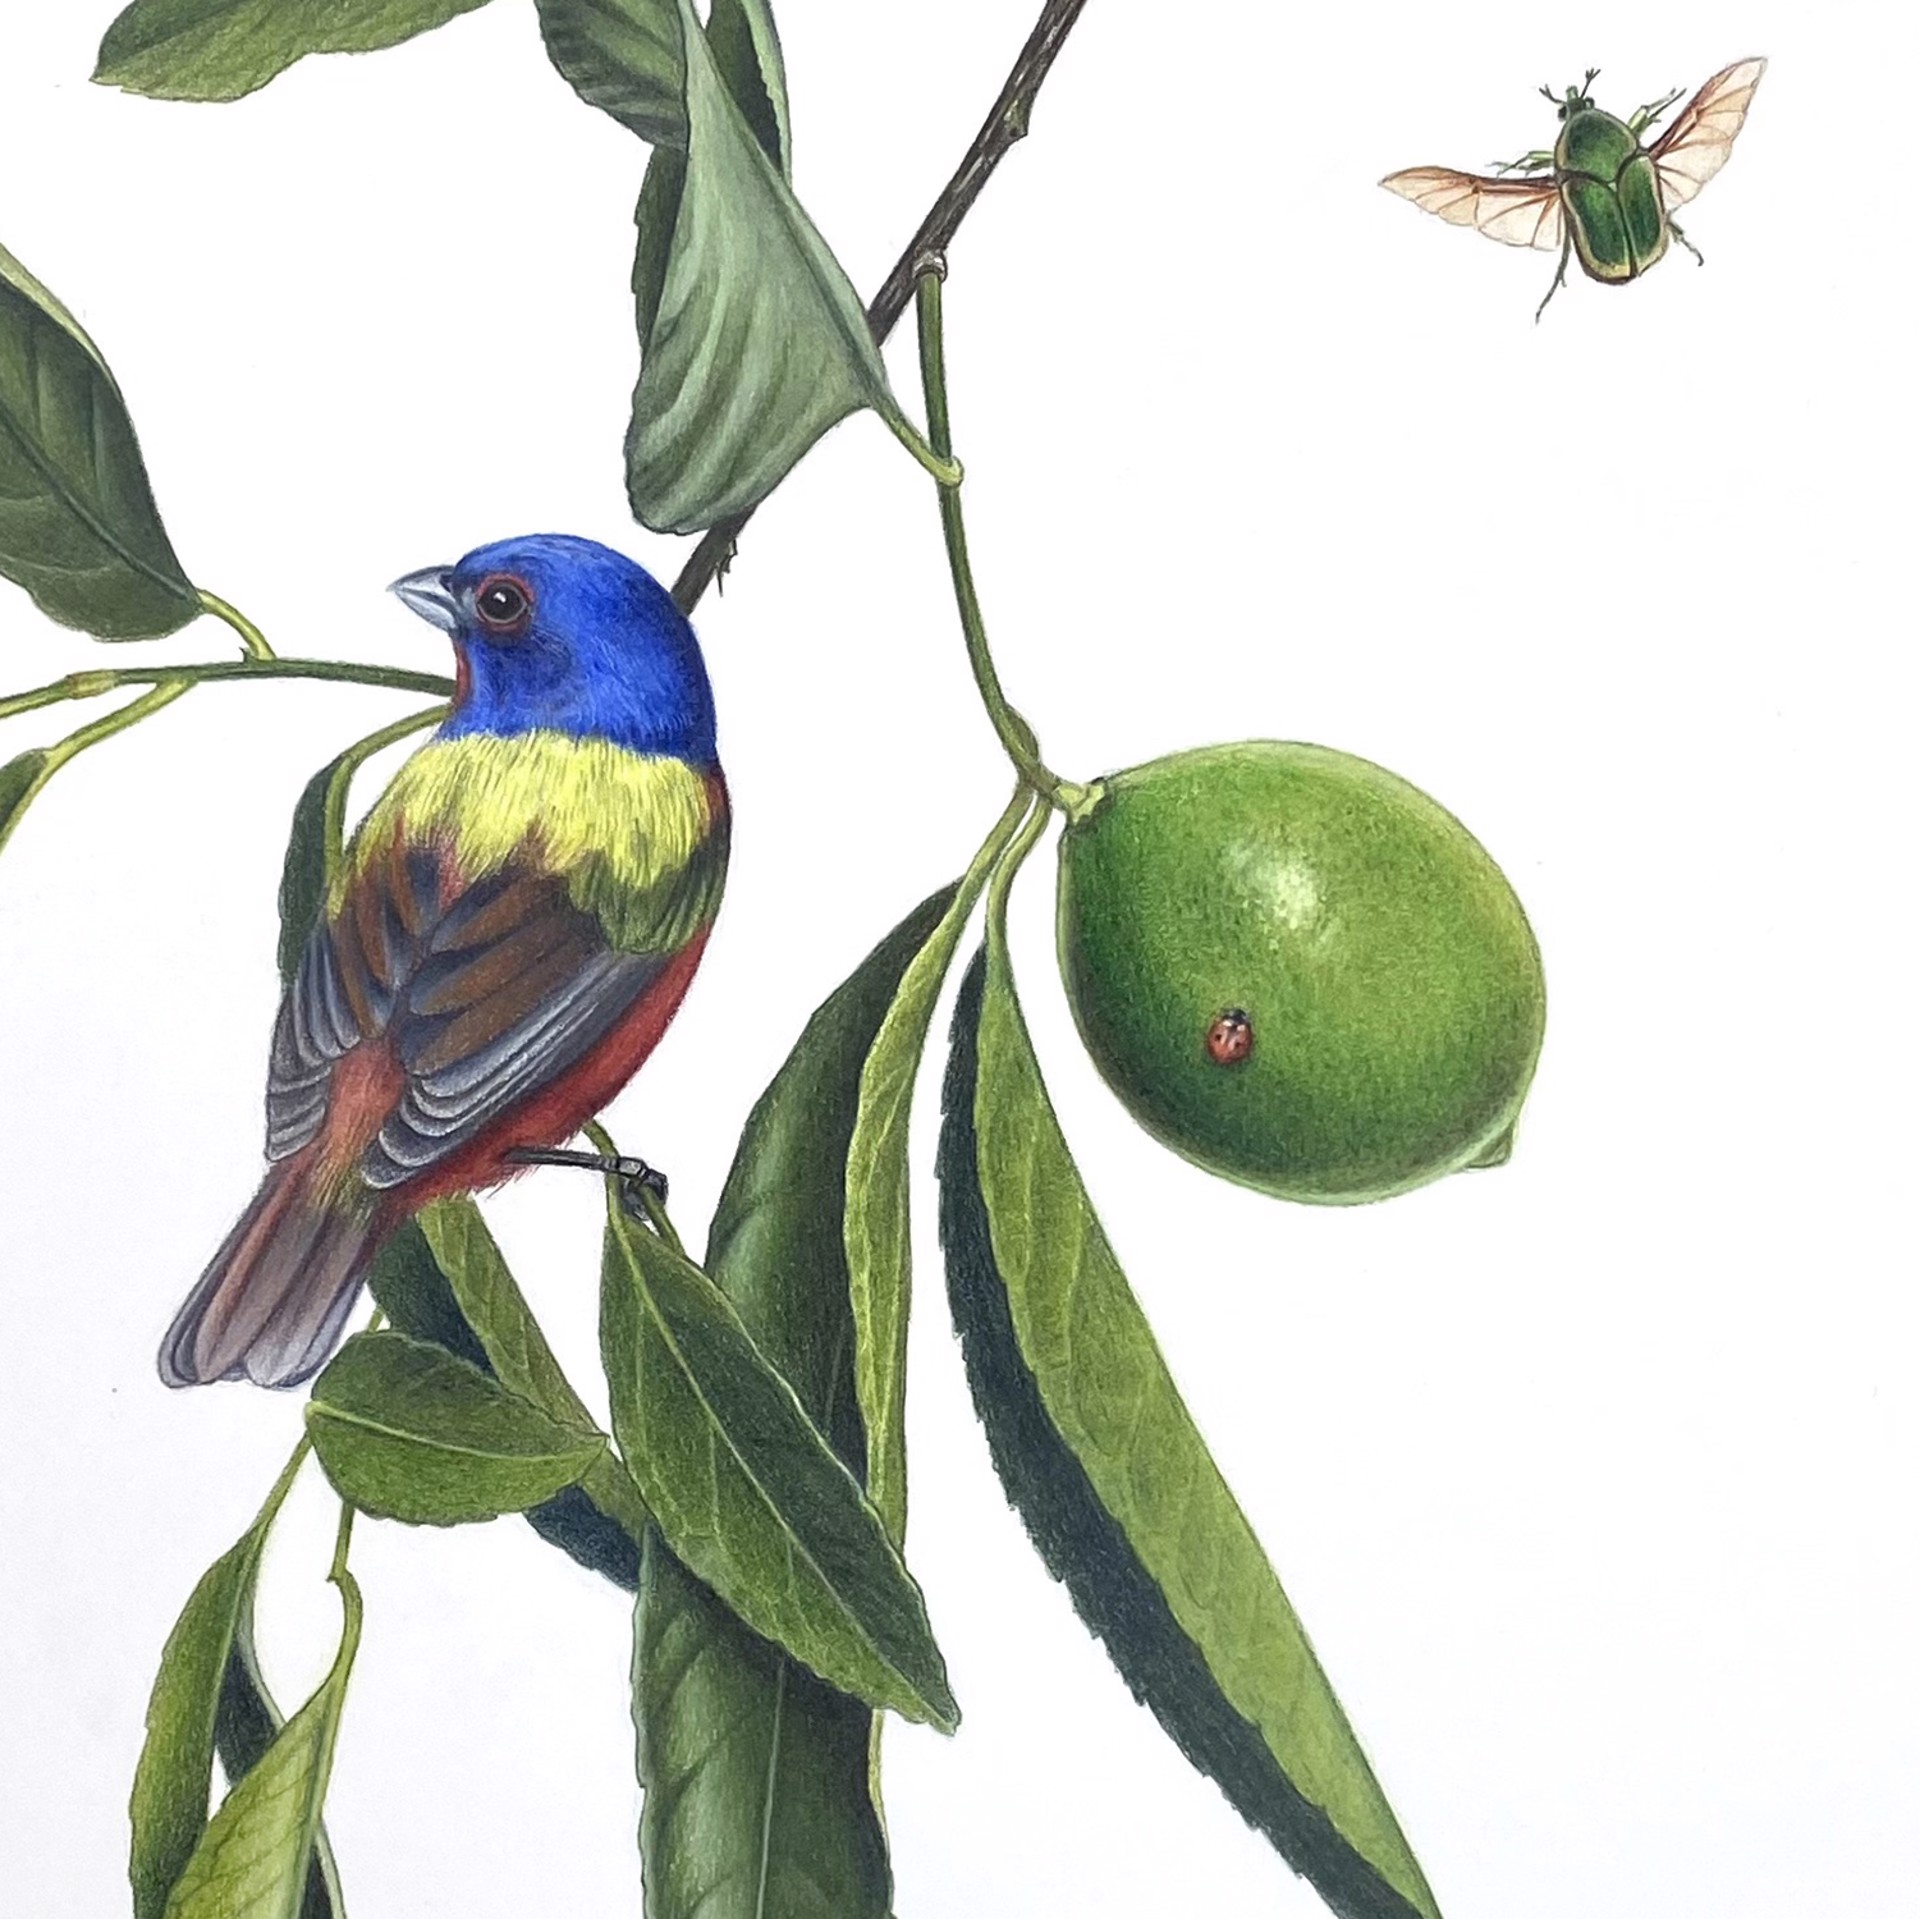 Lime Branch with Painted Bunting, Zebra Longwings, Pipevine, June Bug & Ladybeetle by Hannah Hanlon